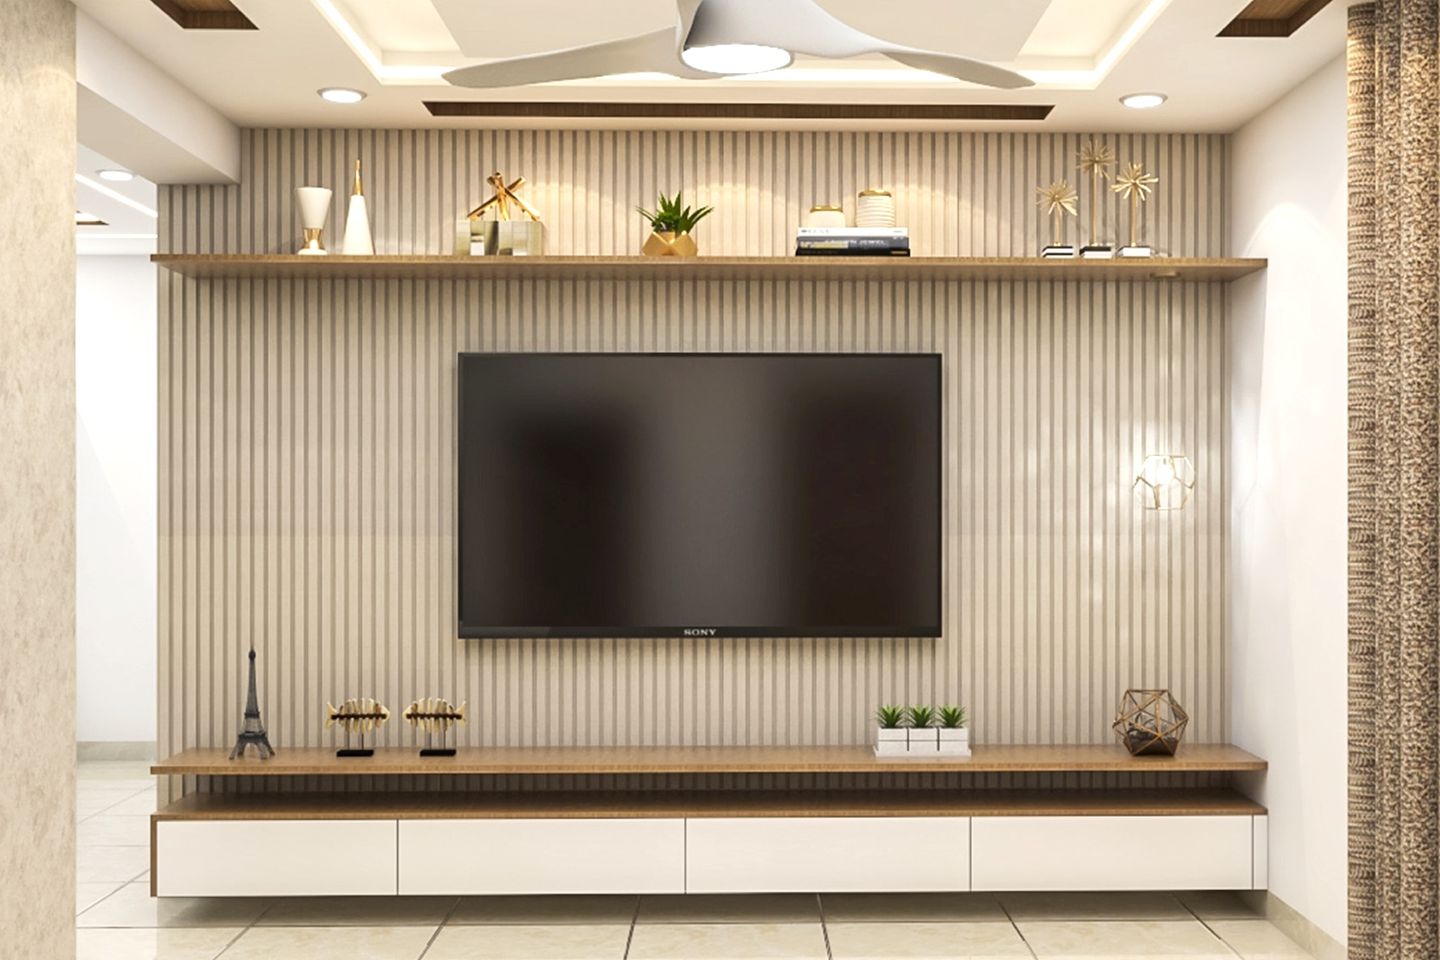 11x11 Ft Contemporary Persian Walnut and Frosty White TV Unit Design with Wall-Mounted Cabinet - Livspace